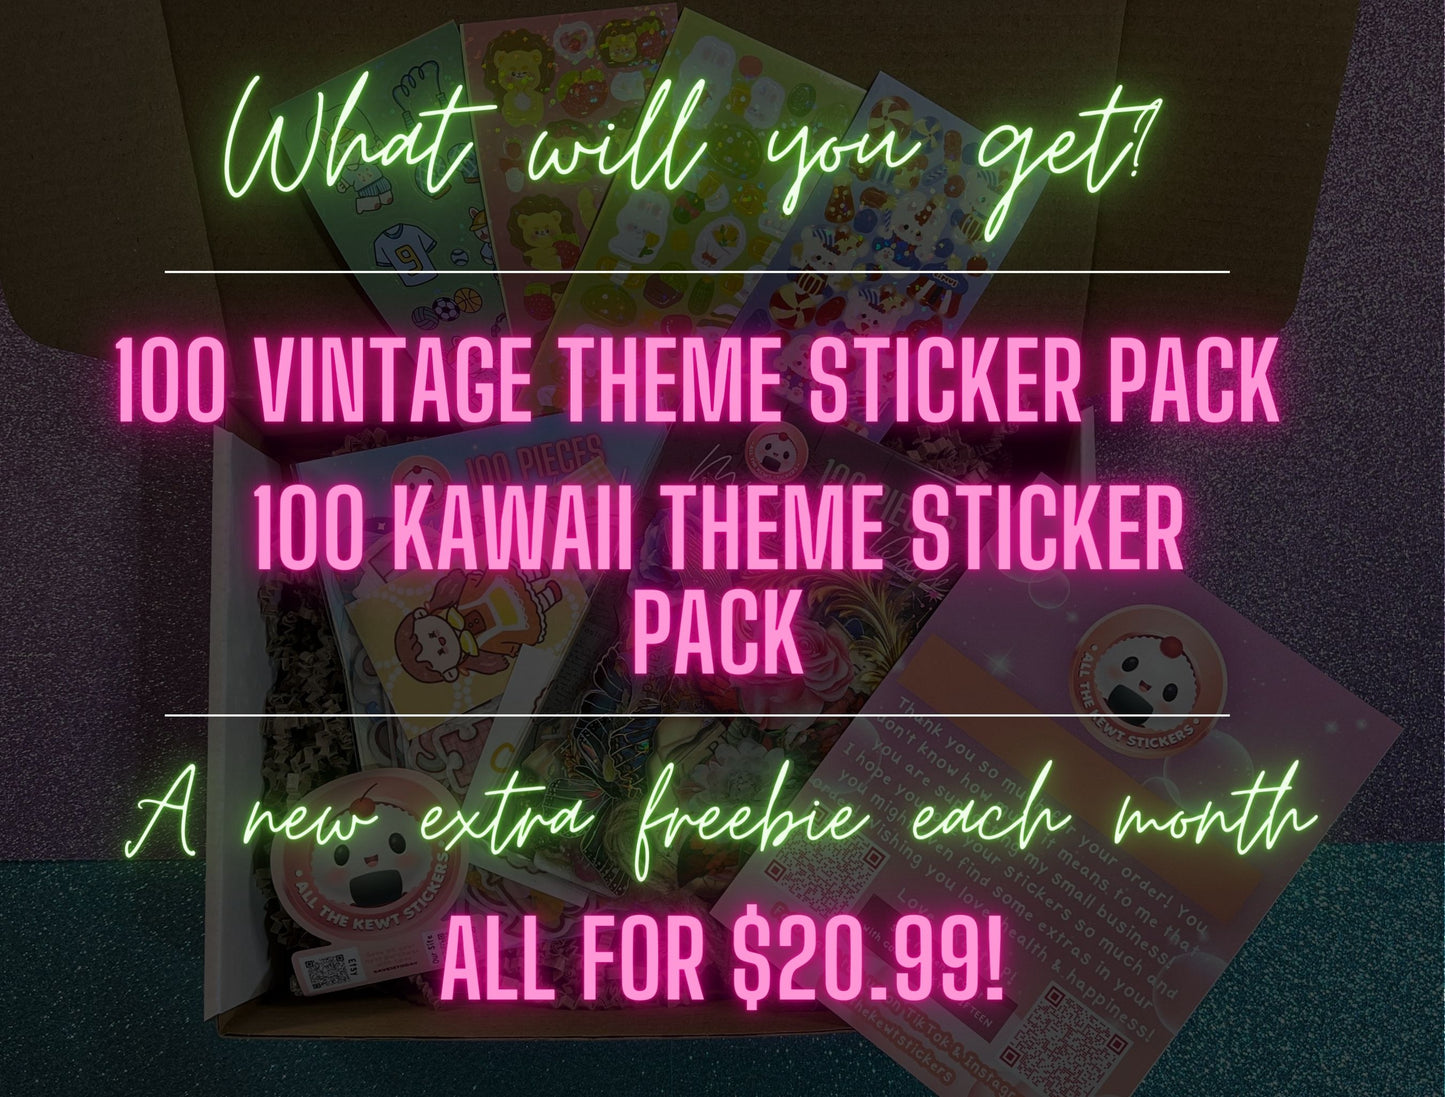 Ultimate Sticker Subscription Pack, Get 200 Stickers each month along with extra freebies!